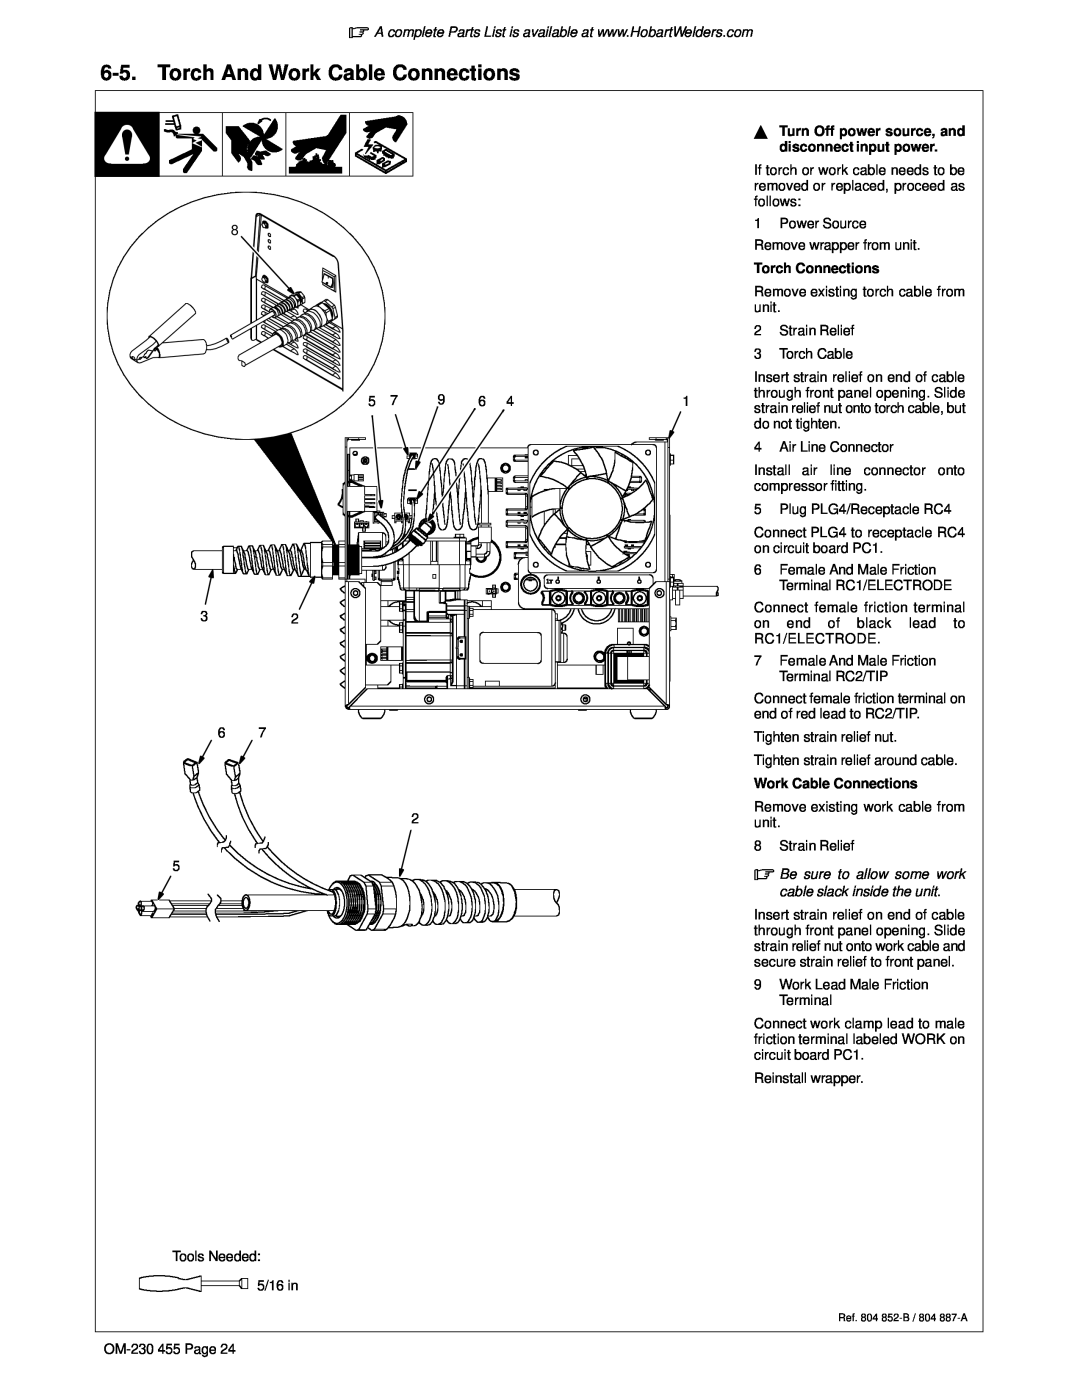 Hobart Welding Products OM-230 455D manual Torch And Work Cable Connections, disconnect input power, Torch Connections 